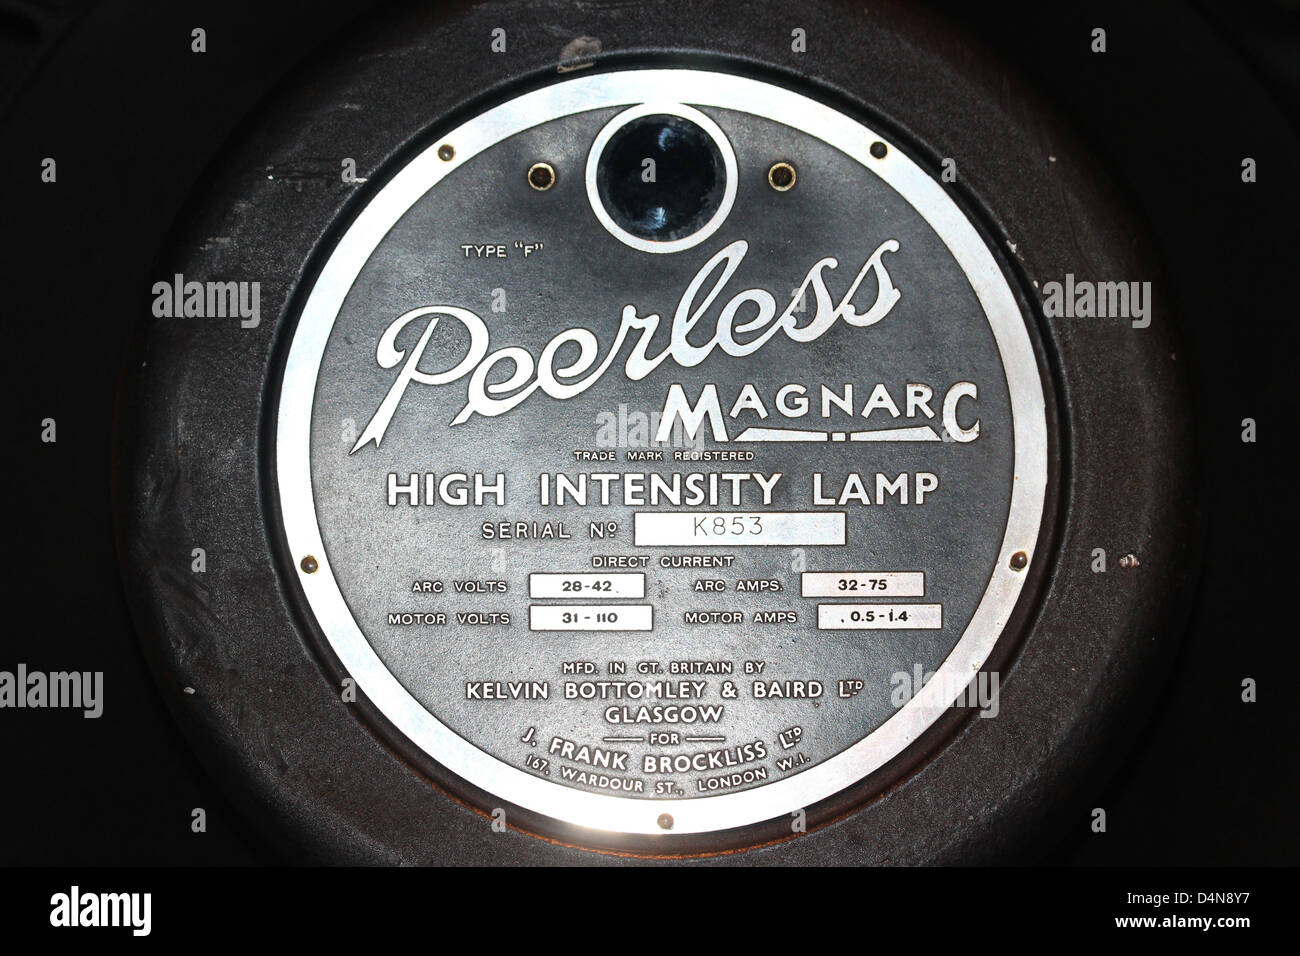 A Peerless Magnarc High Intensity Lamp for use with early 20th century film projectors. Stock Photo